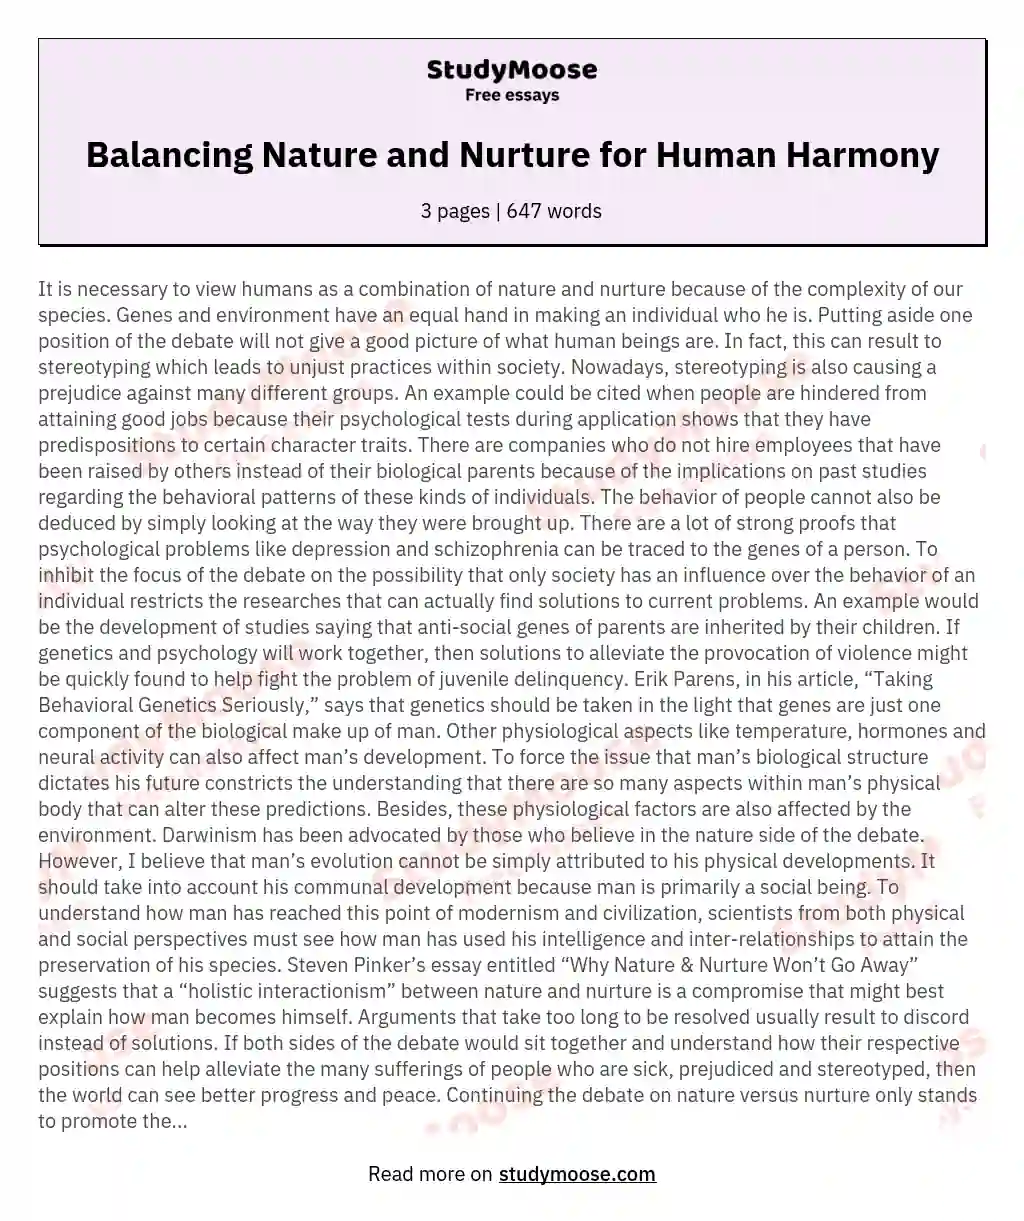 Balancing Nature and Nurture for Human Harmony essay